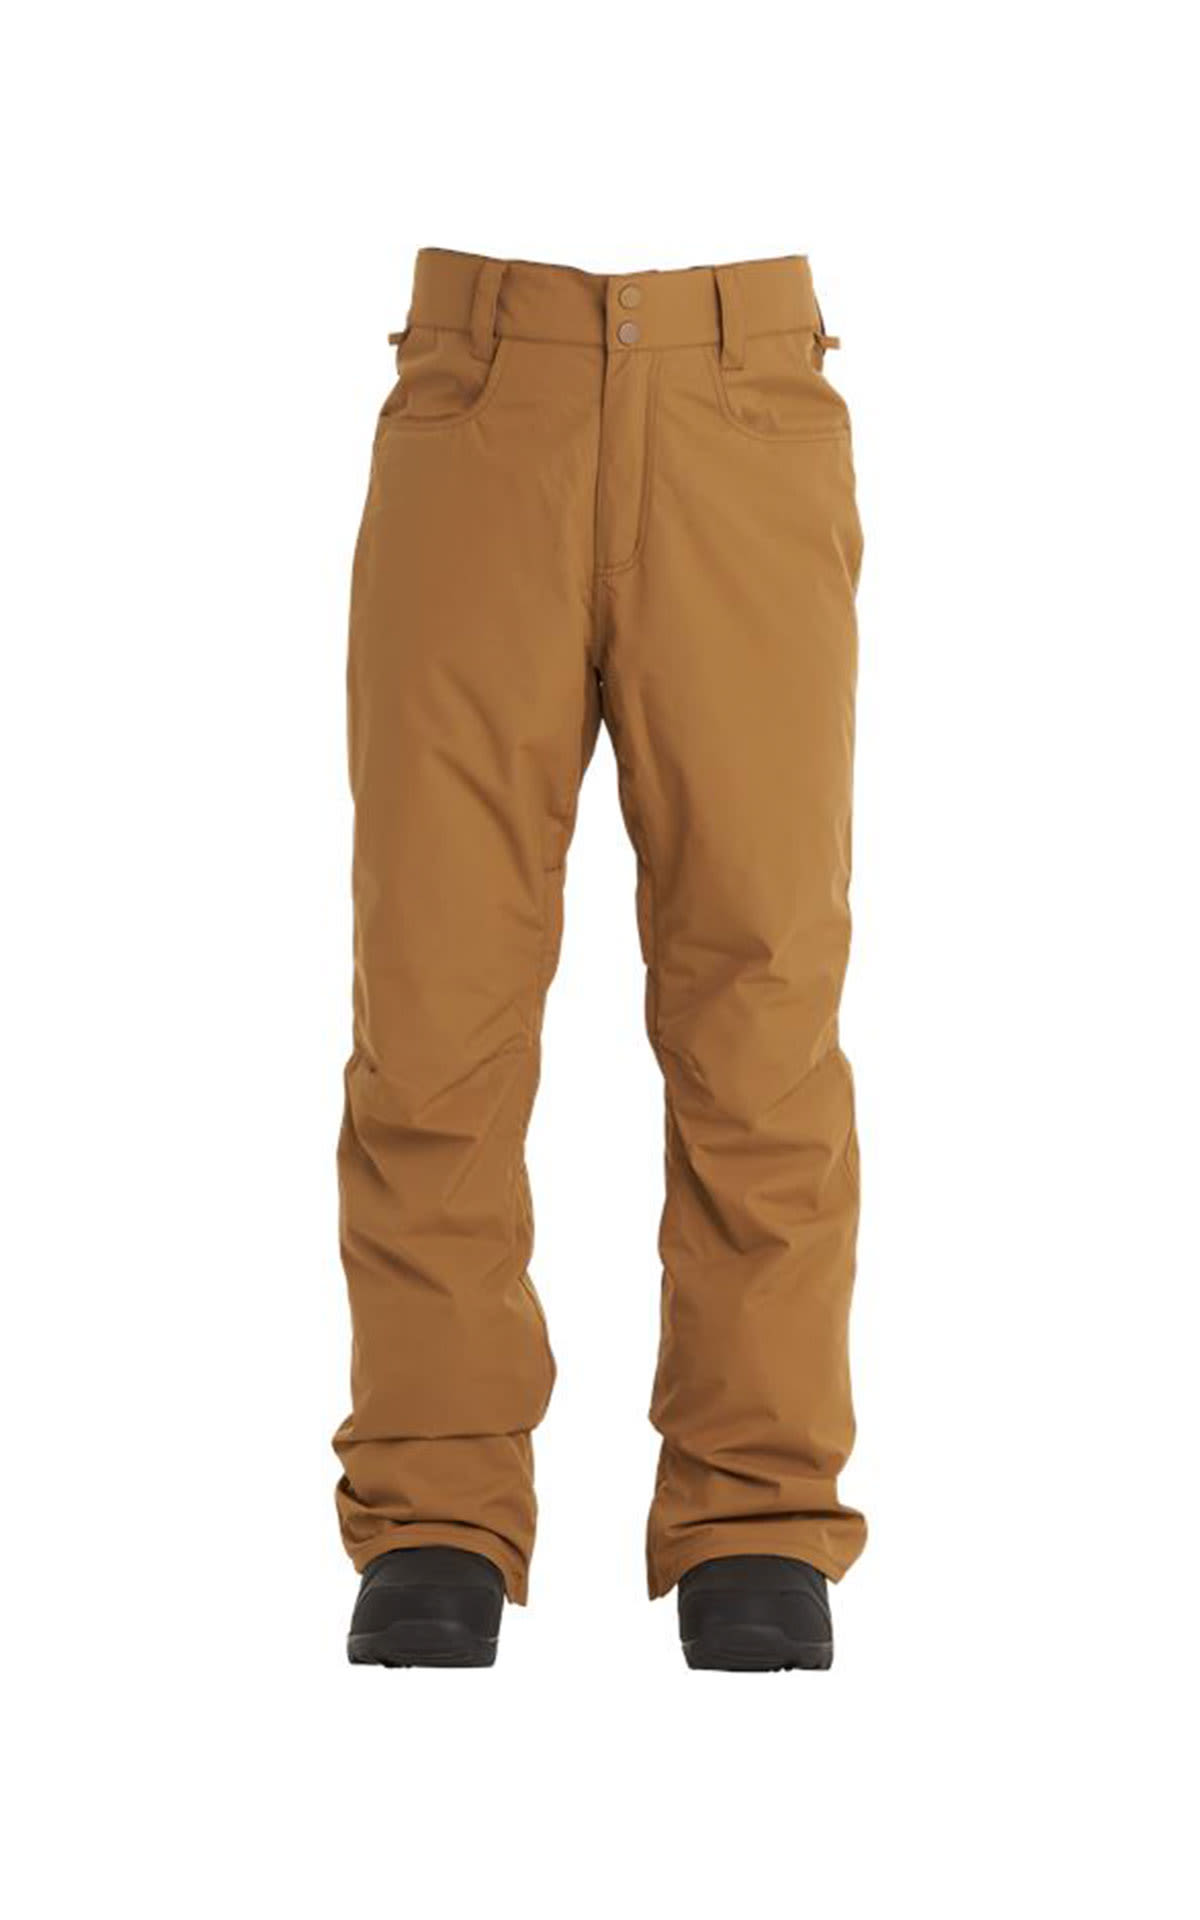 Boardriders outsider pant